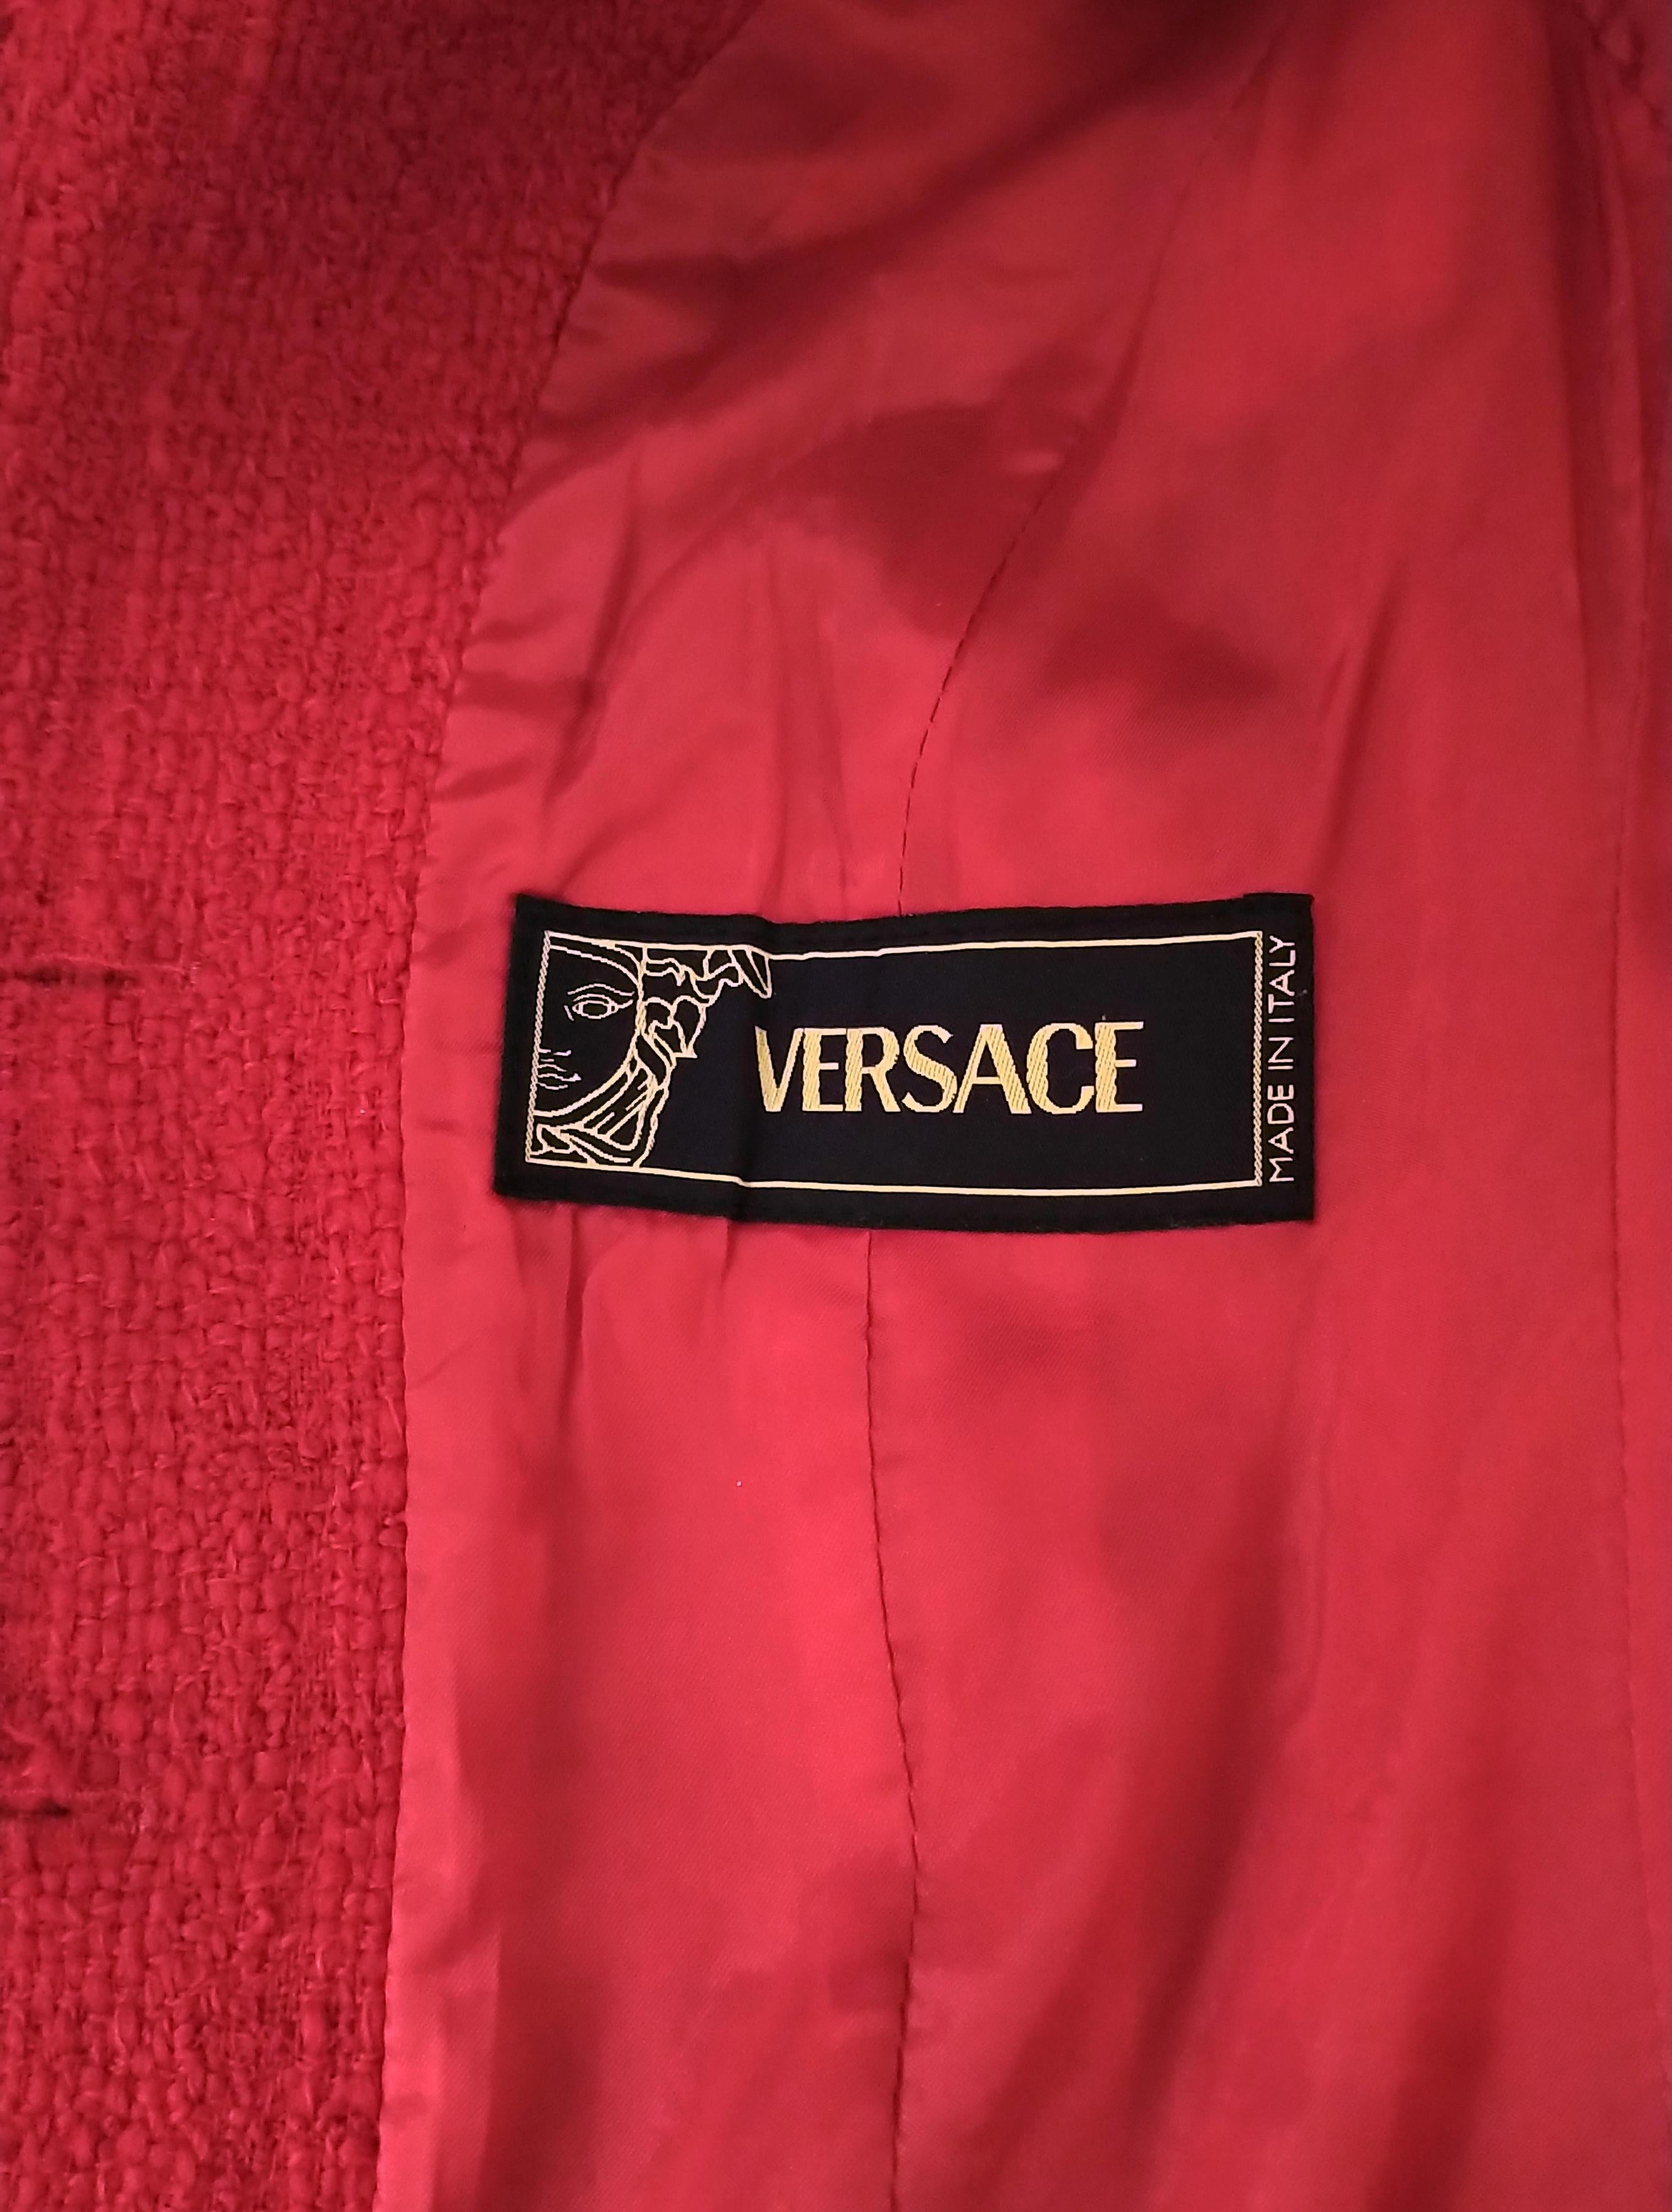 Gianni Versace 1990's Medusa Lipstick Red Tweed Fringe Fitted Jacket IT 38/ 2 4 For Sale 6